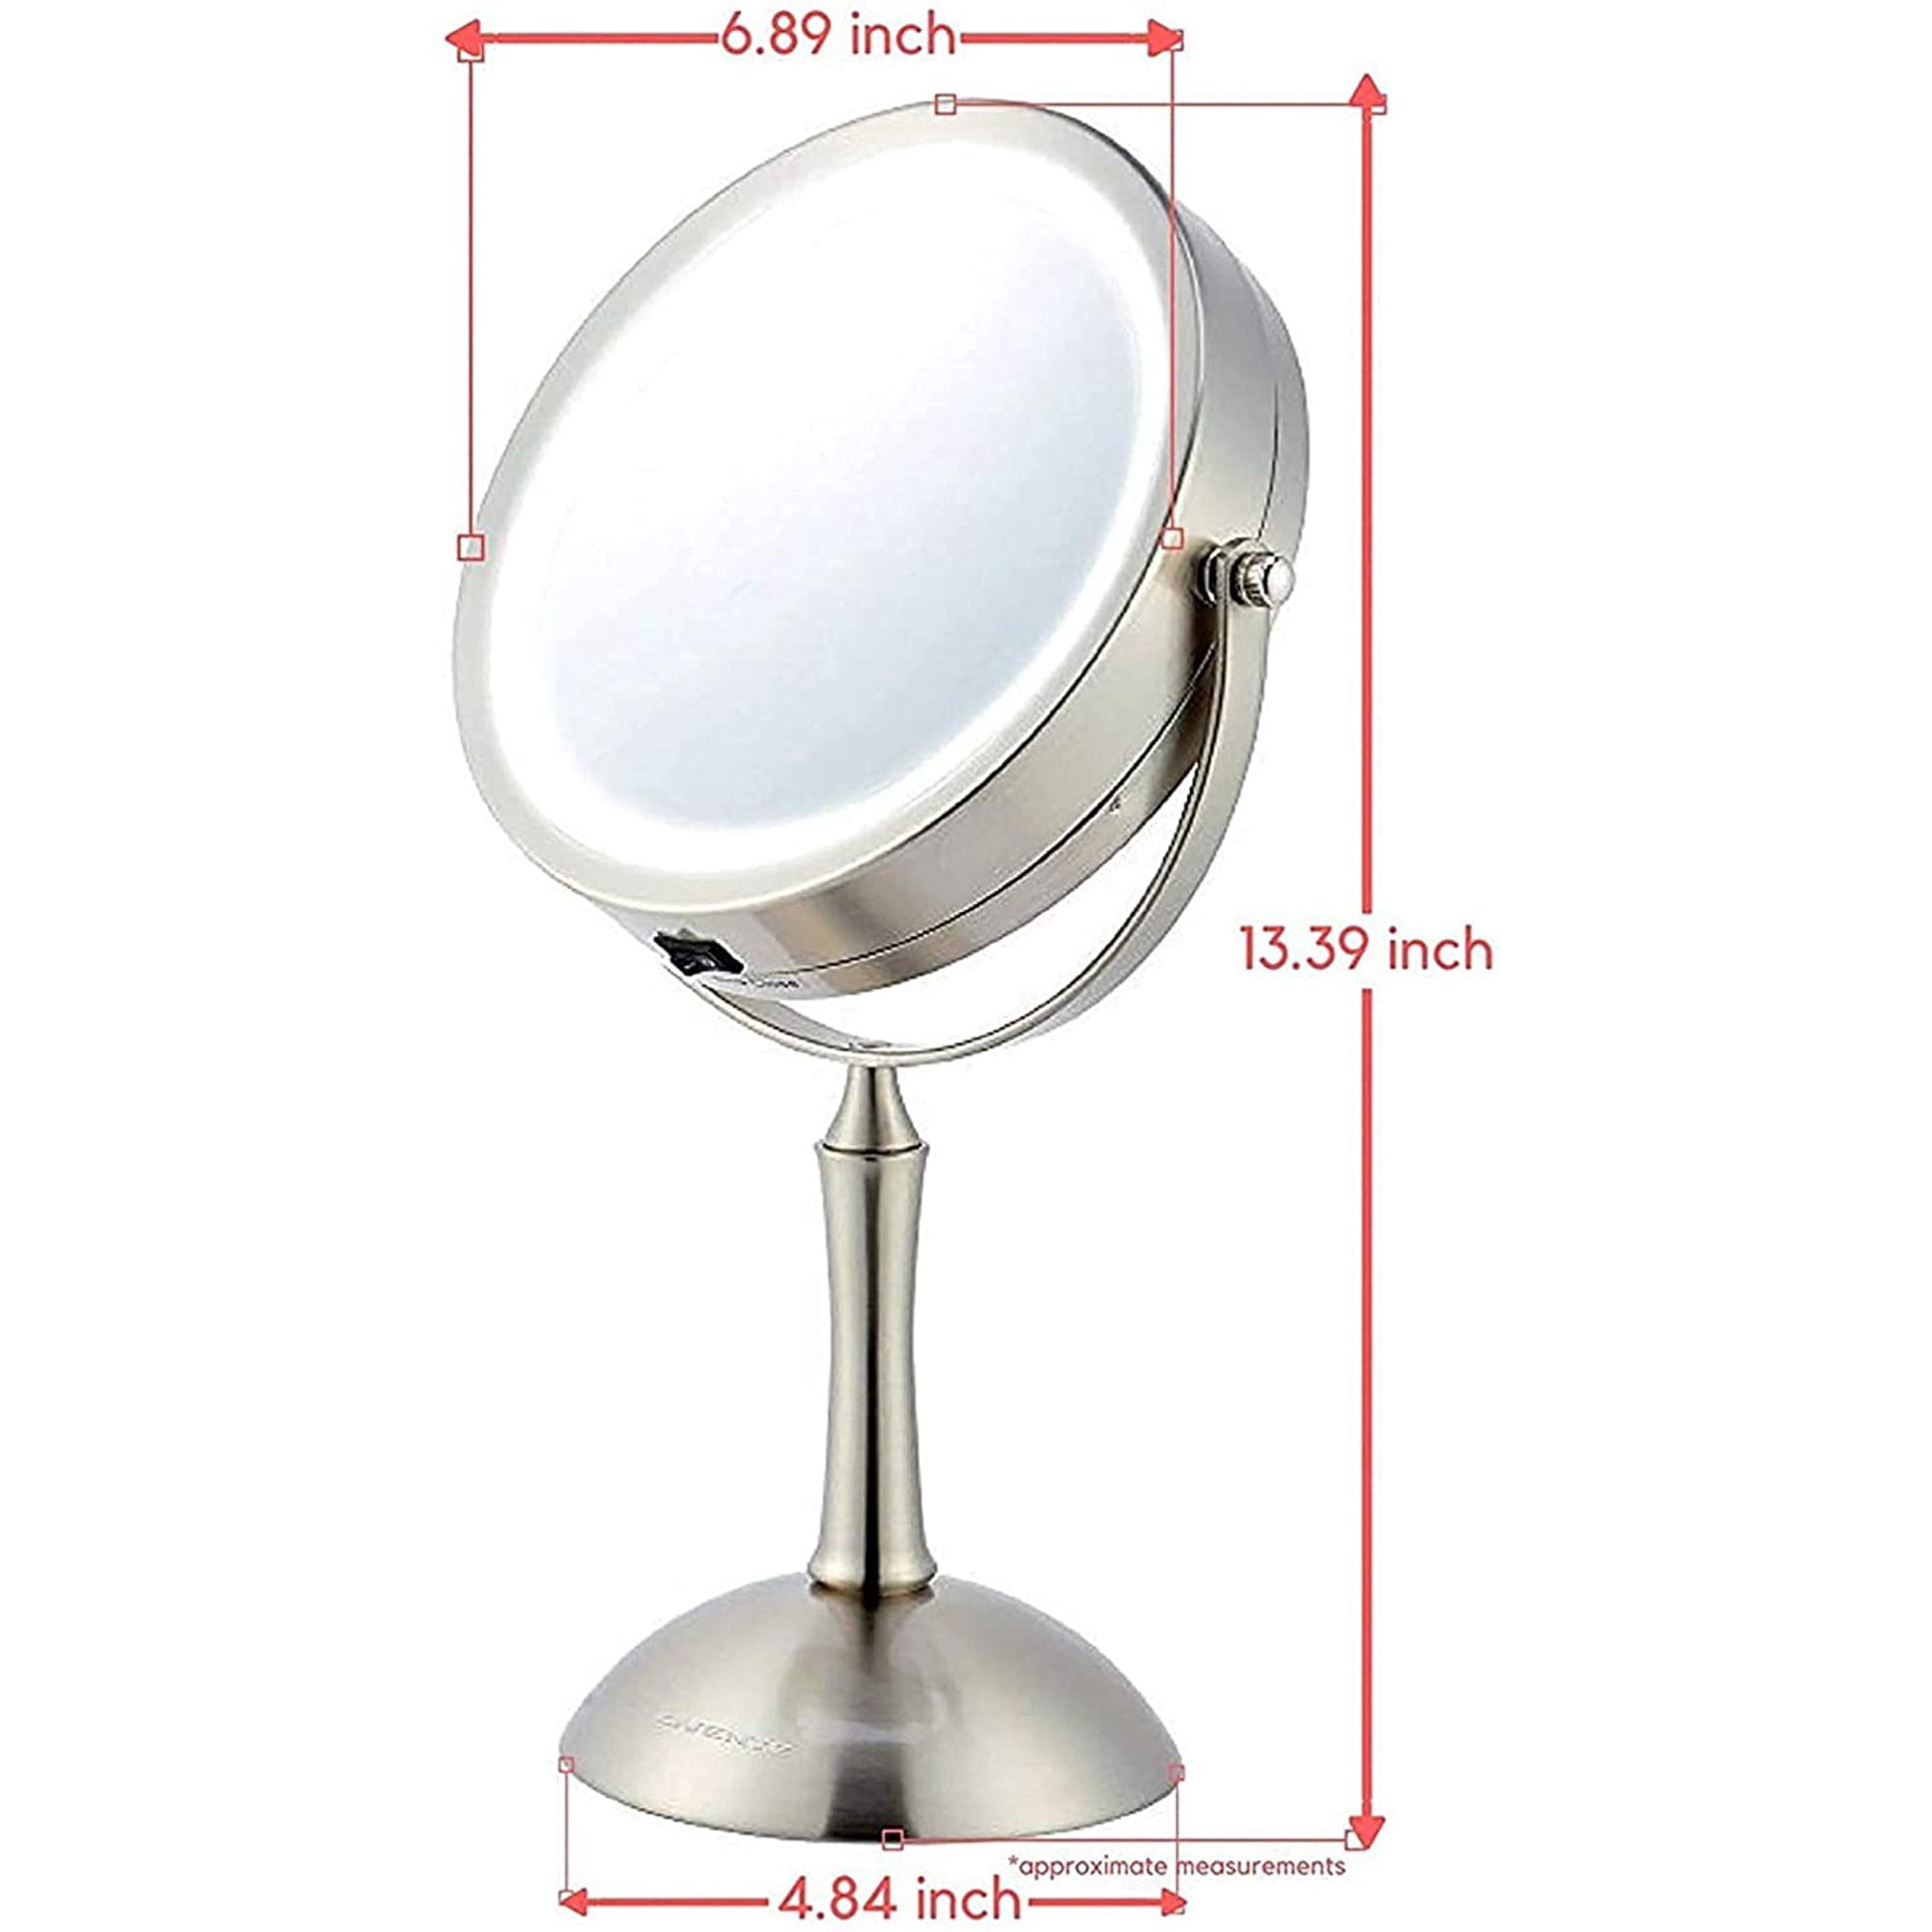 camouflage Formuler Tag fat Ovente Round Lighted Table Top Makeup Mirror 7 Inch 1X 8X Magnification LED  Ring Light 360 Adjustable Double Sided Spinning Desk Bathroom Stand Large  4AAA Battery Powered Nickel Brushed MDT70BR1X8X - Walmart.com